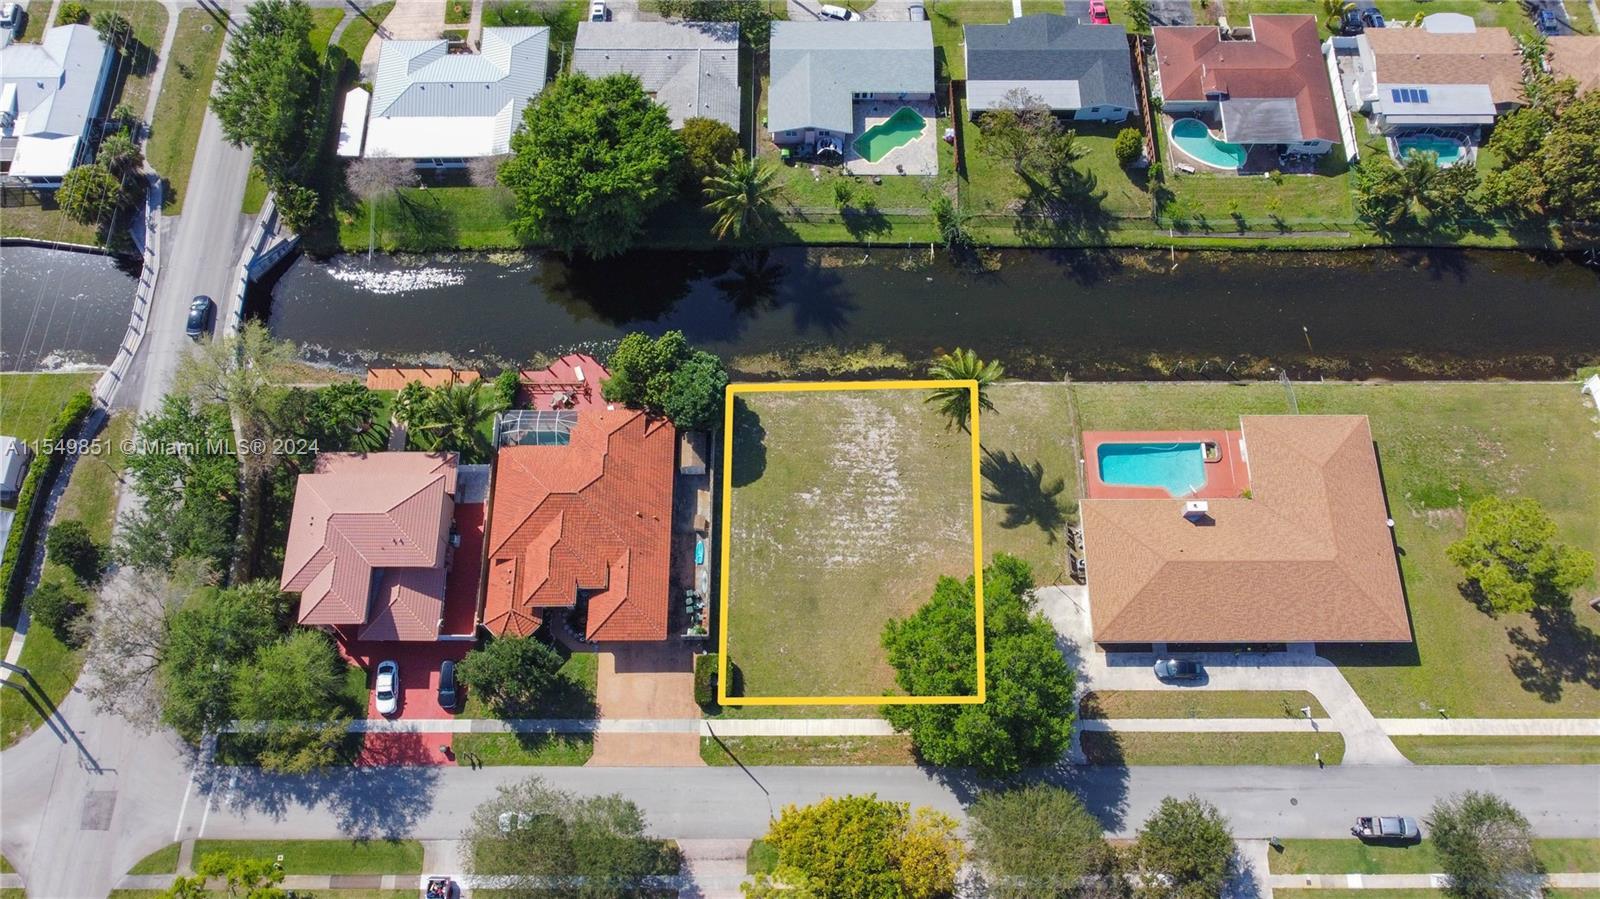 Photo of 42 Nw Ave in Coconut Creek, FL